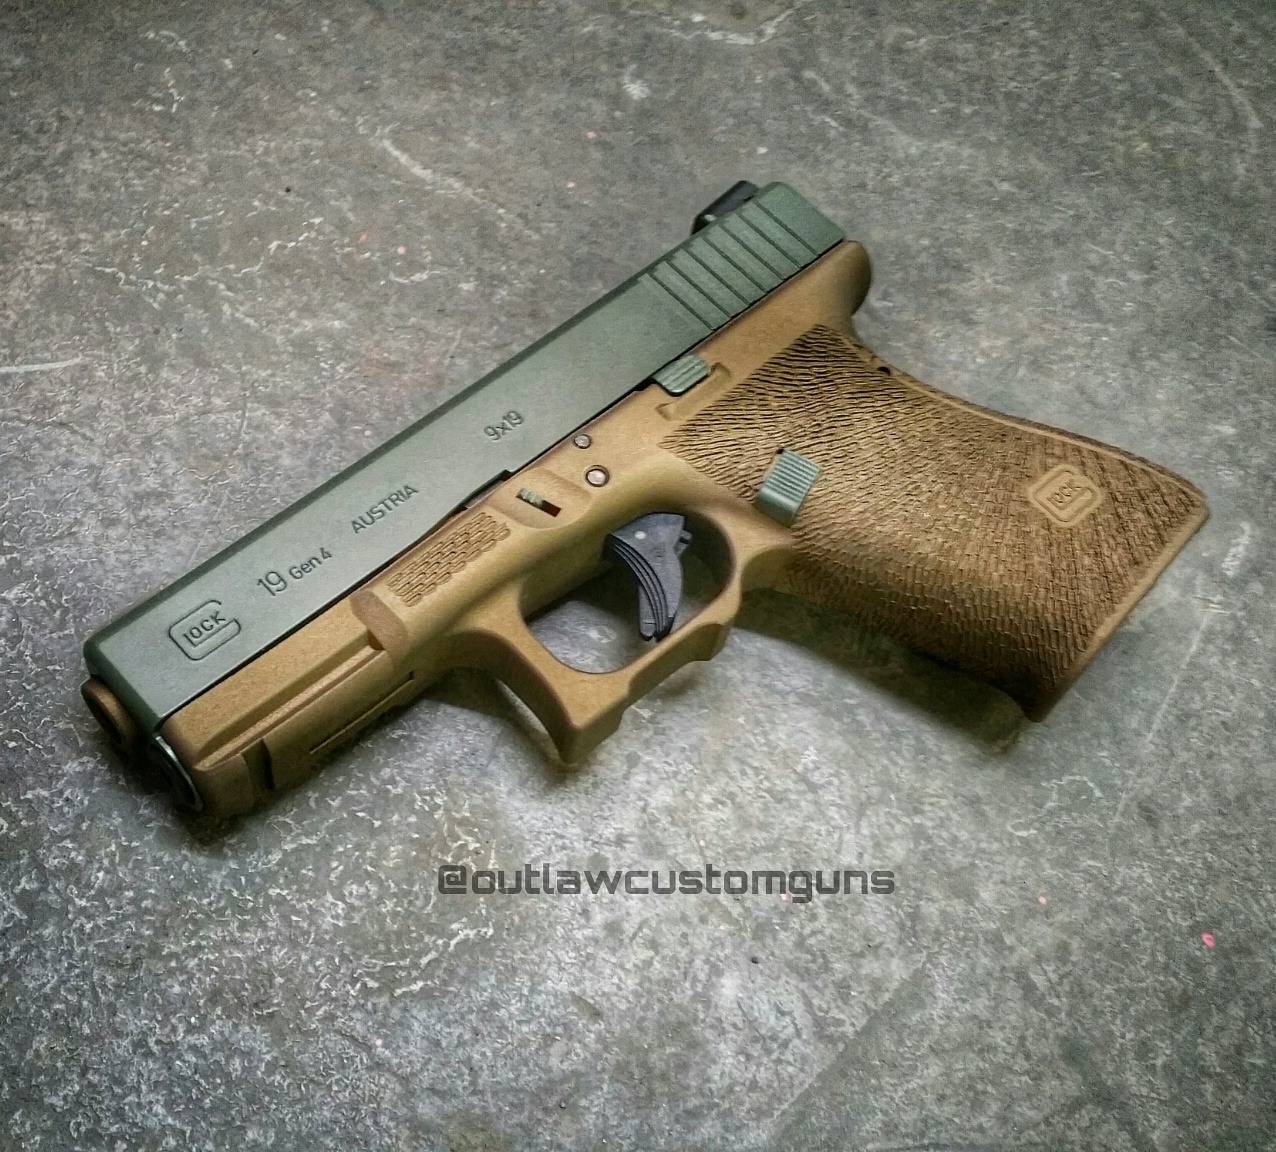 Cerakote Work Done In House Clean 2 Tone Glock 19 With